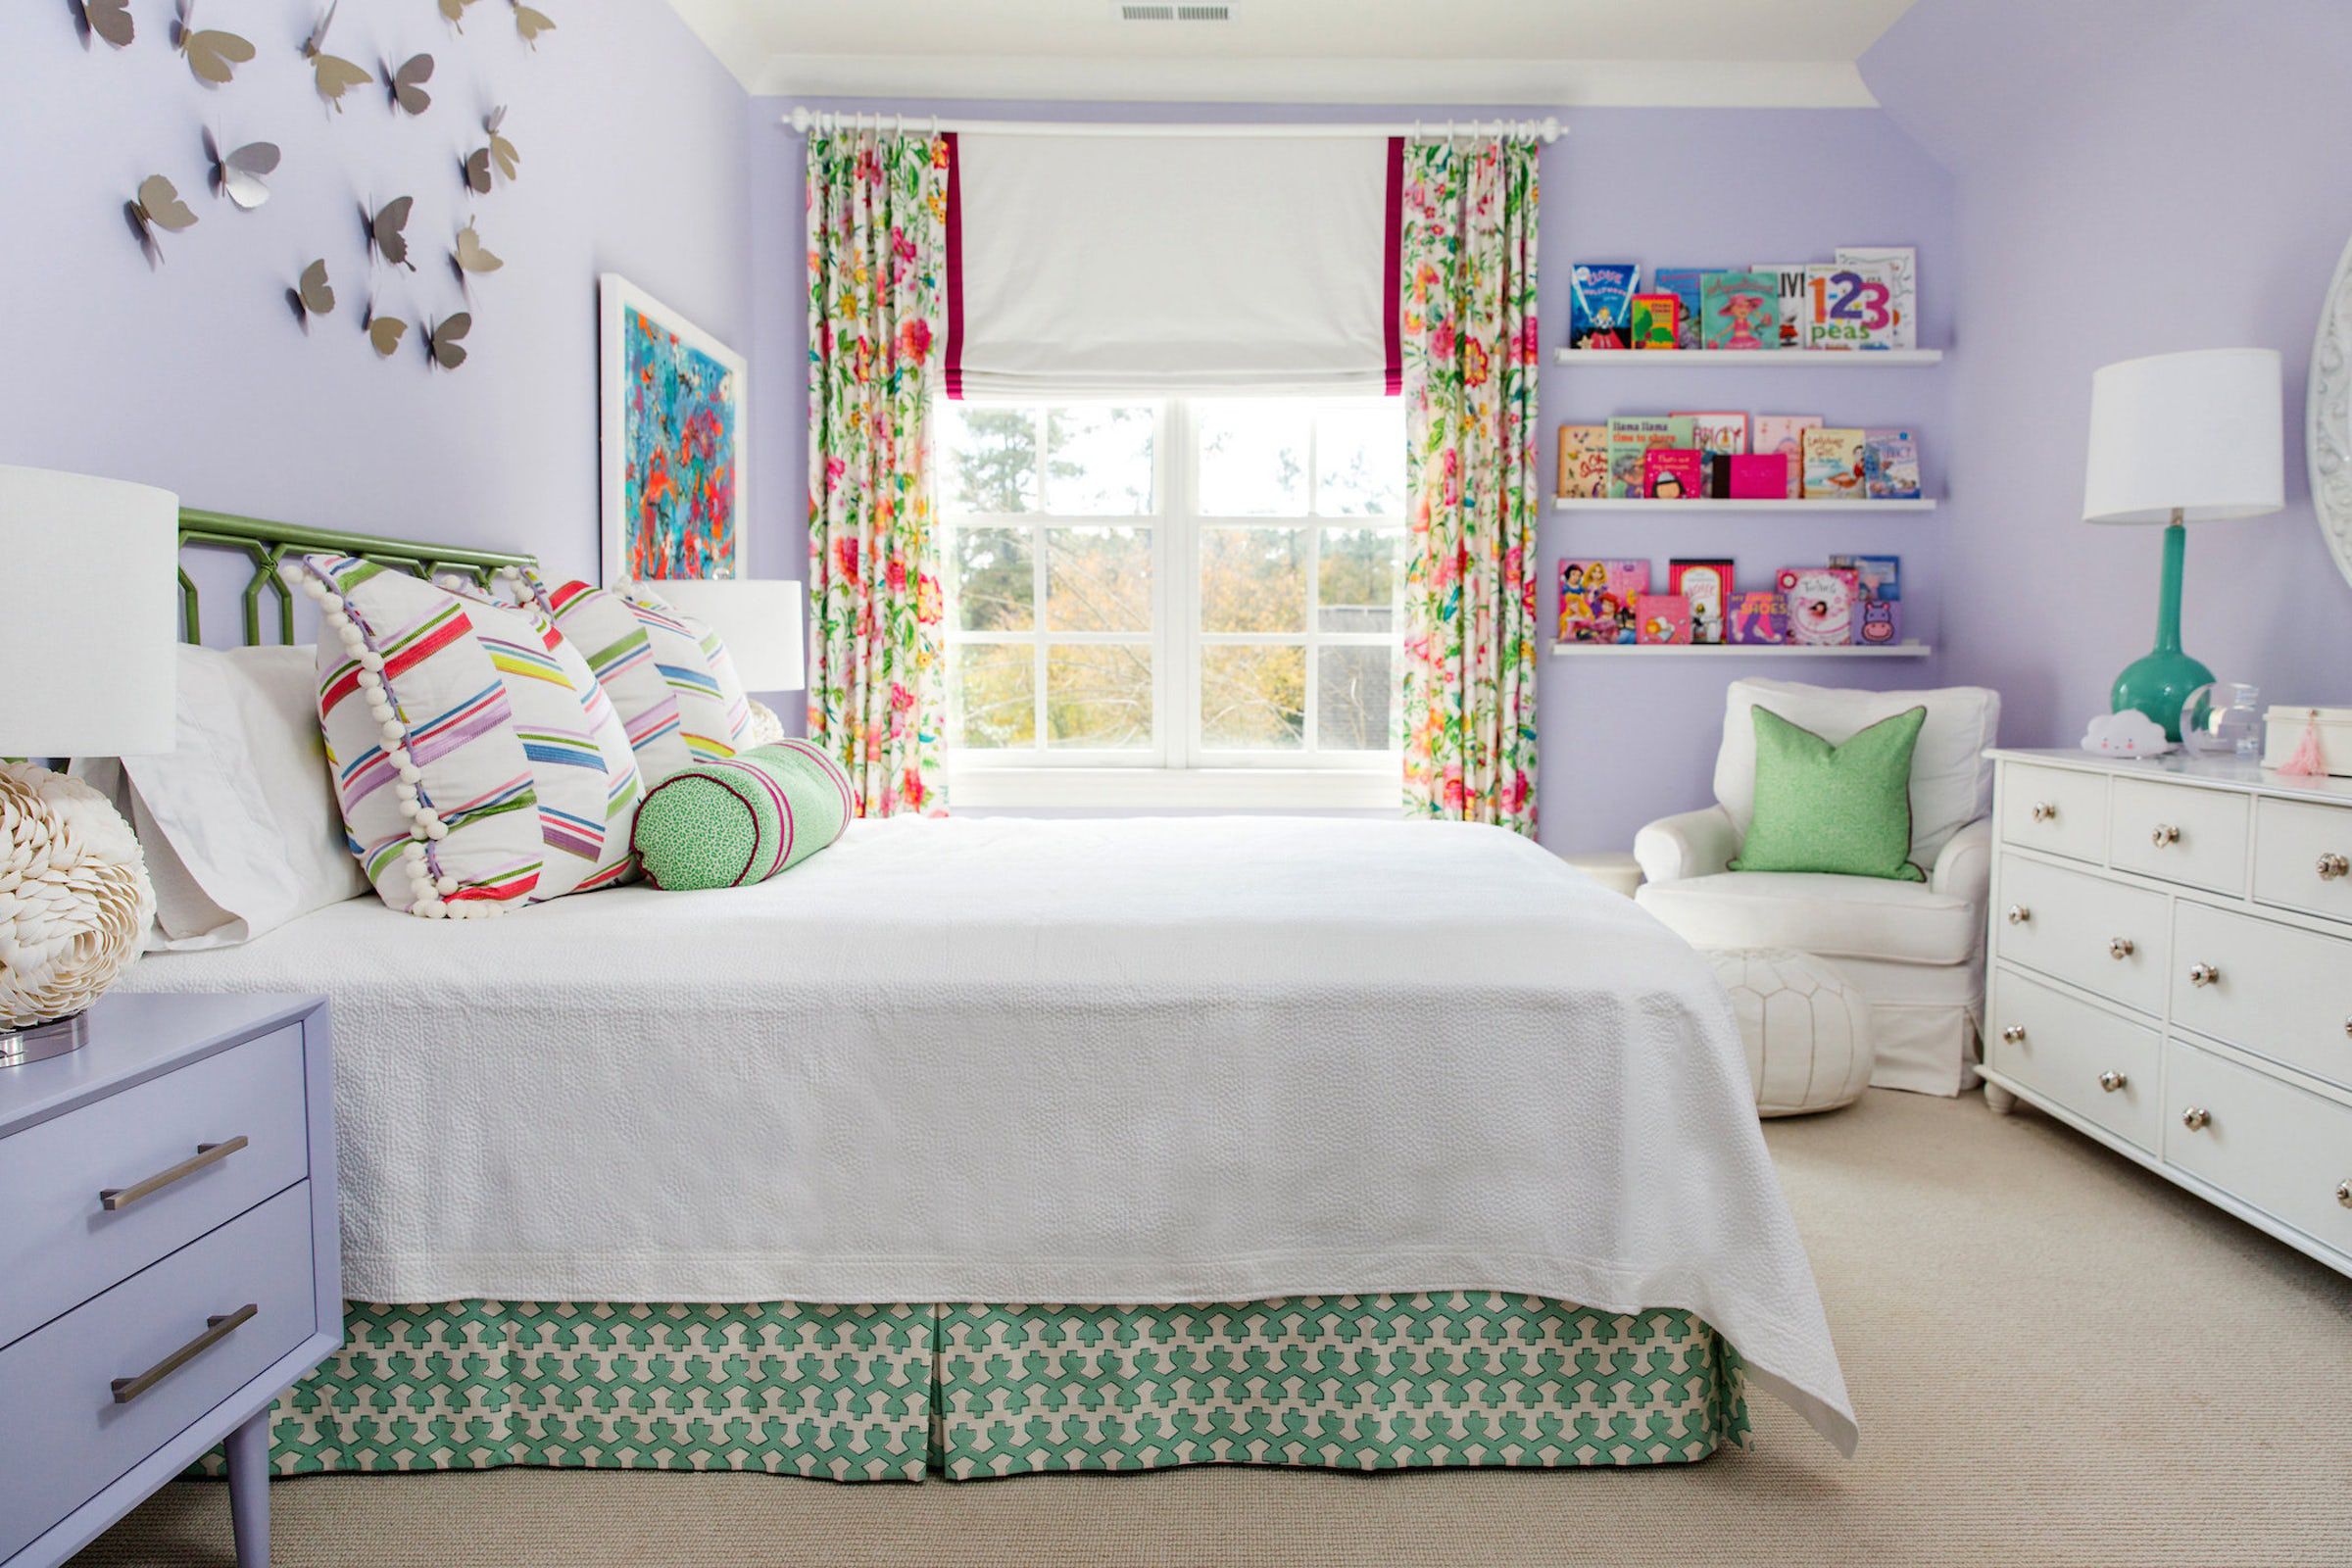 15 Creative Girls Room Ideas - How to Decorate a Girl's Bedroom